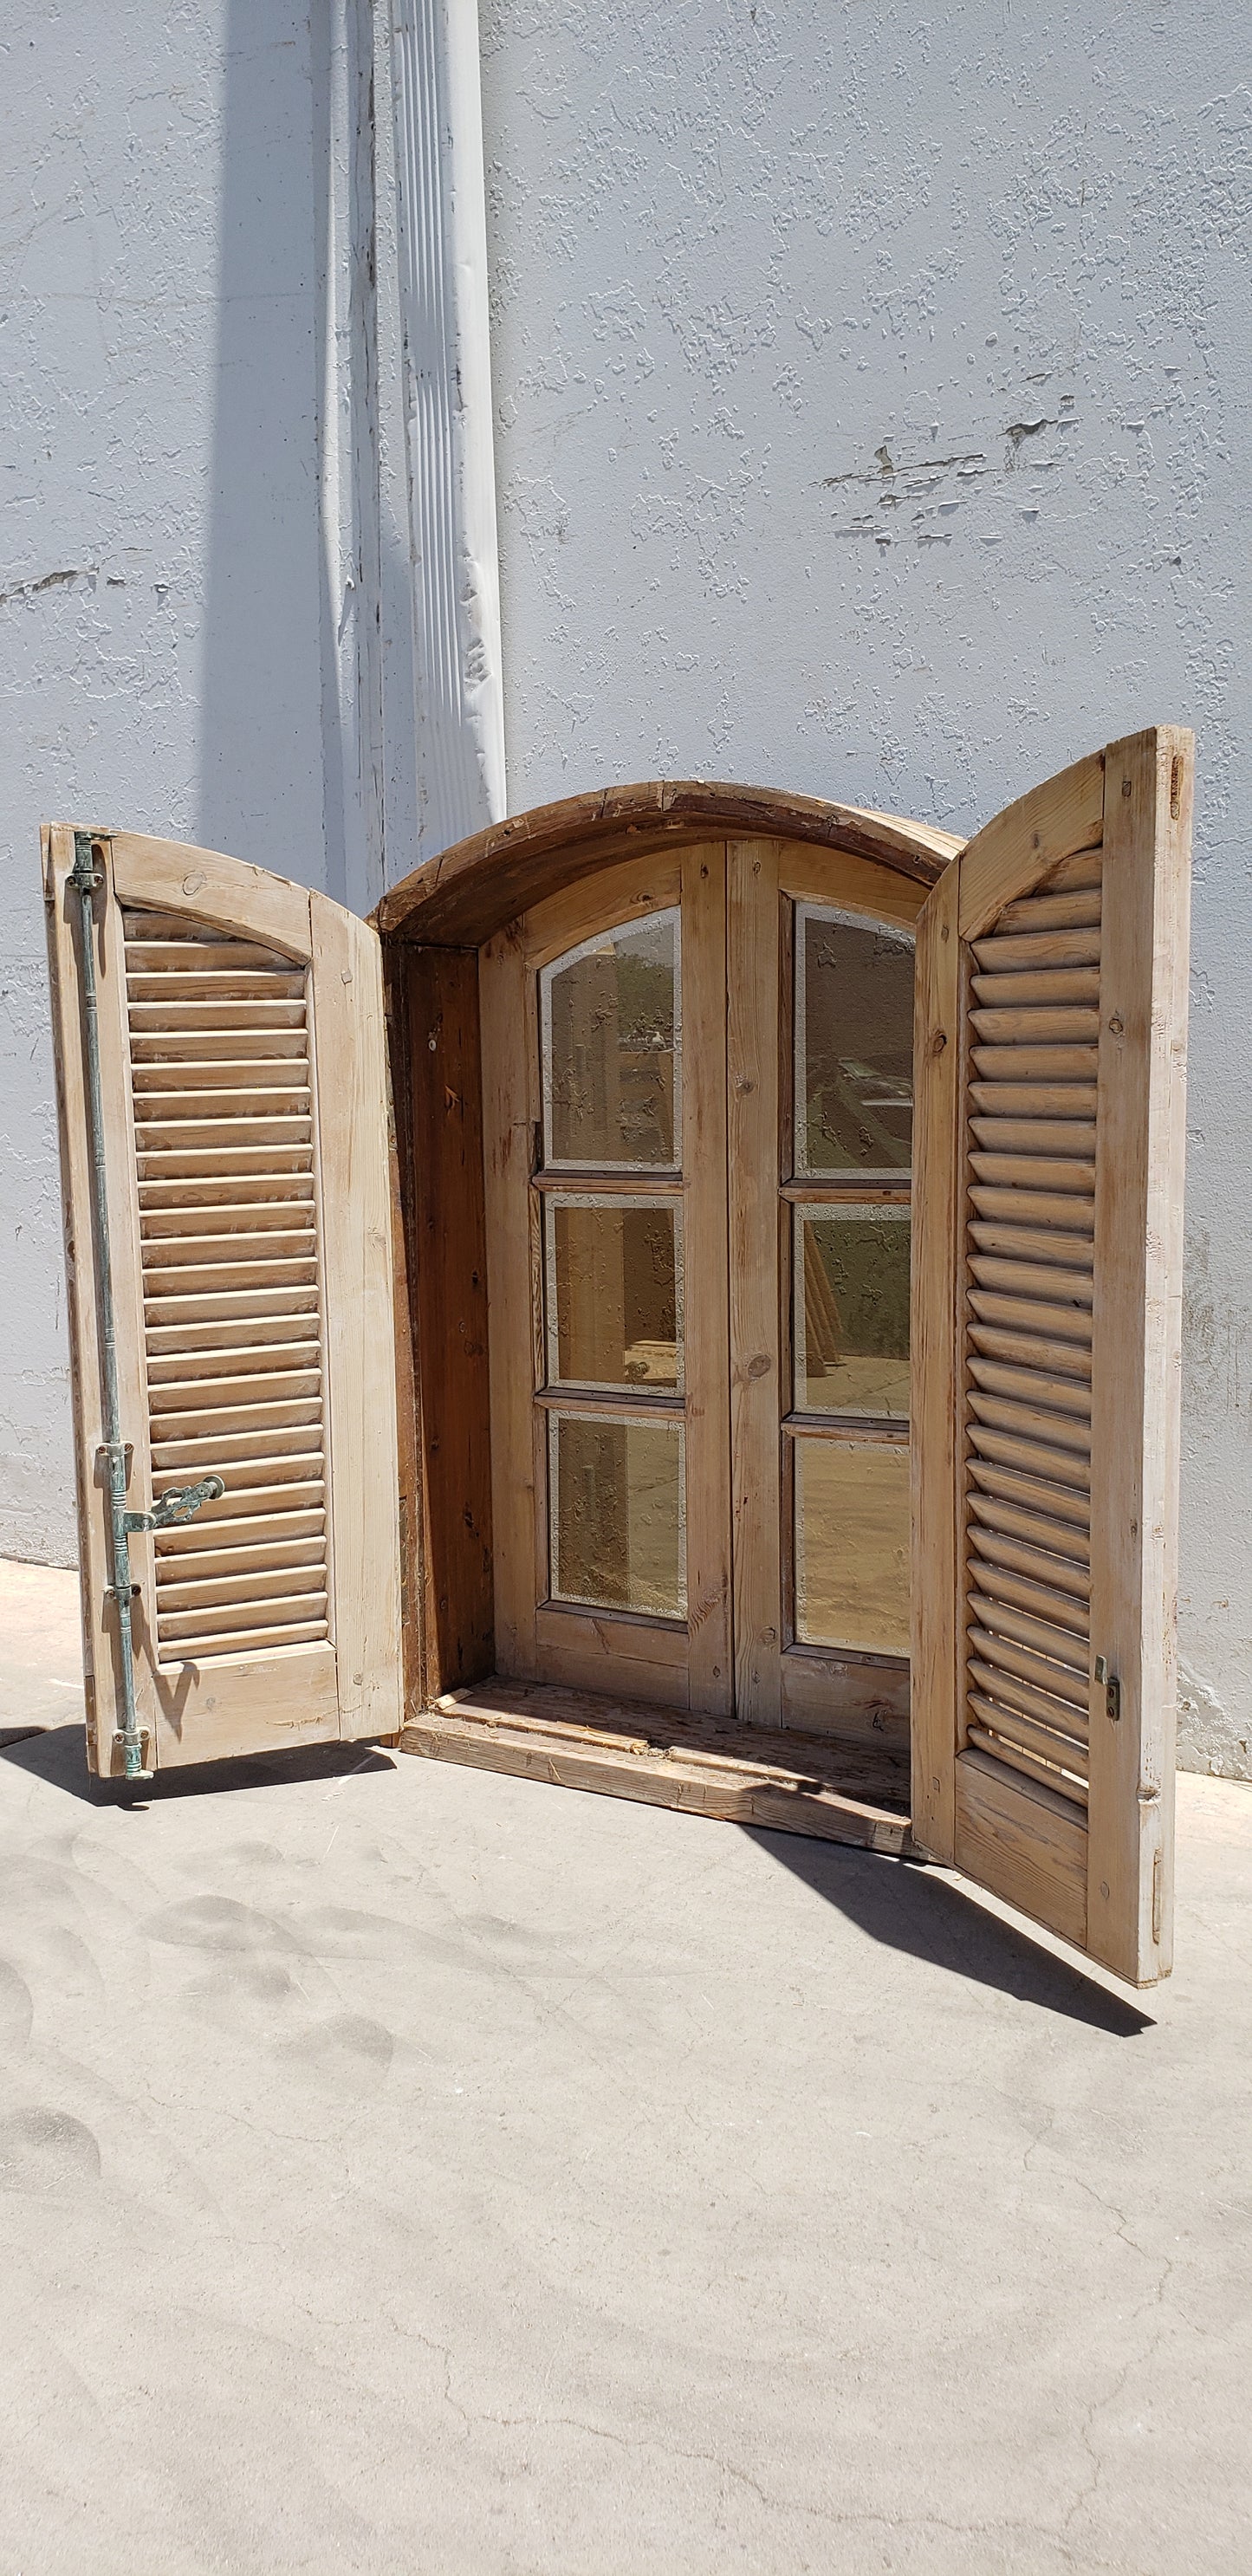 6 Lite Arched Wooden Window and Shutter Set